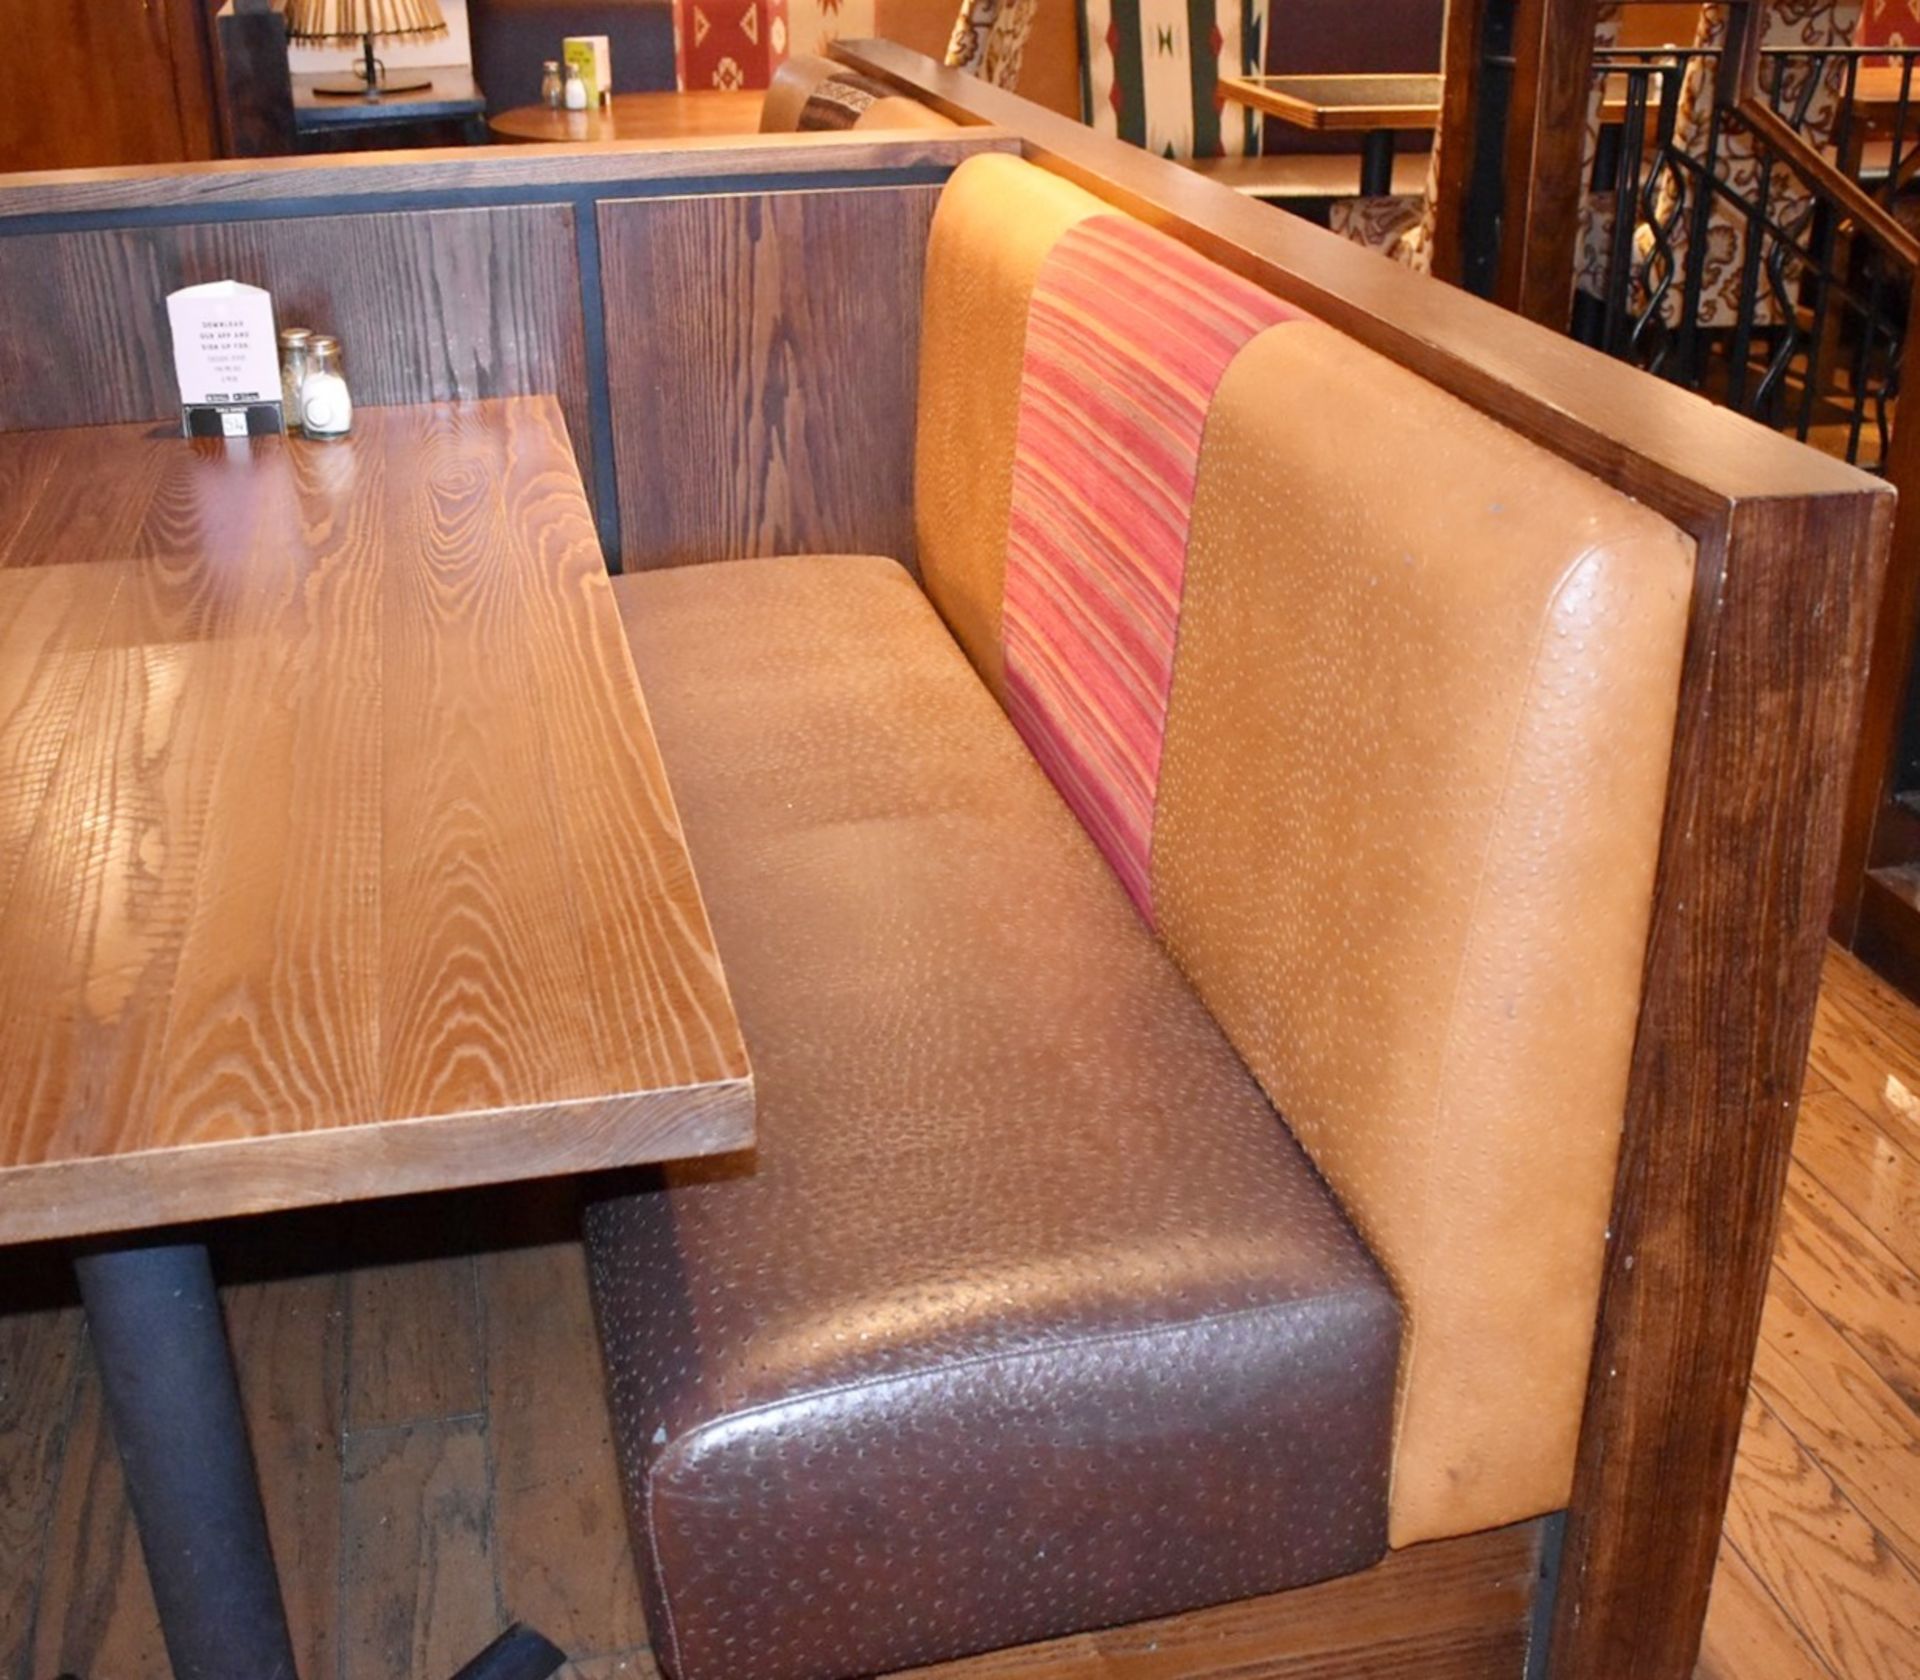 15-Pieces Of Restaurant Booth Seating Of Varying Length - Image 8 of 22